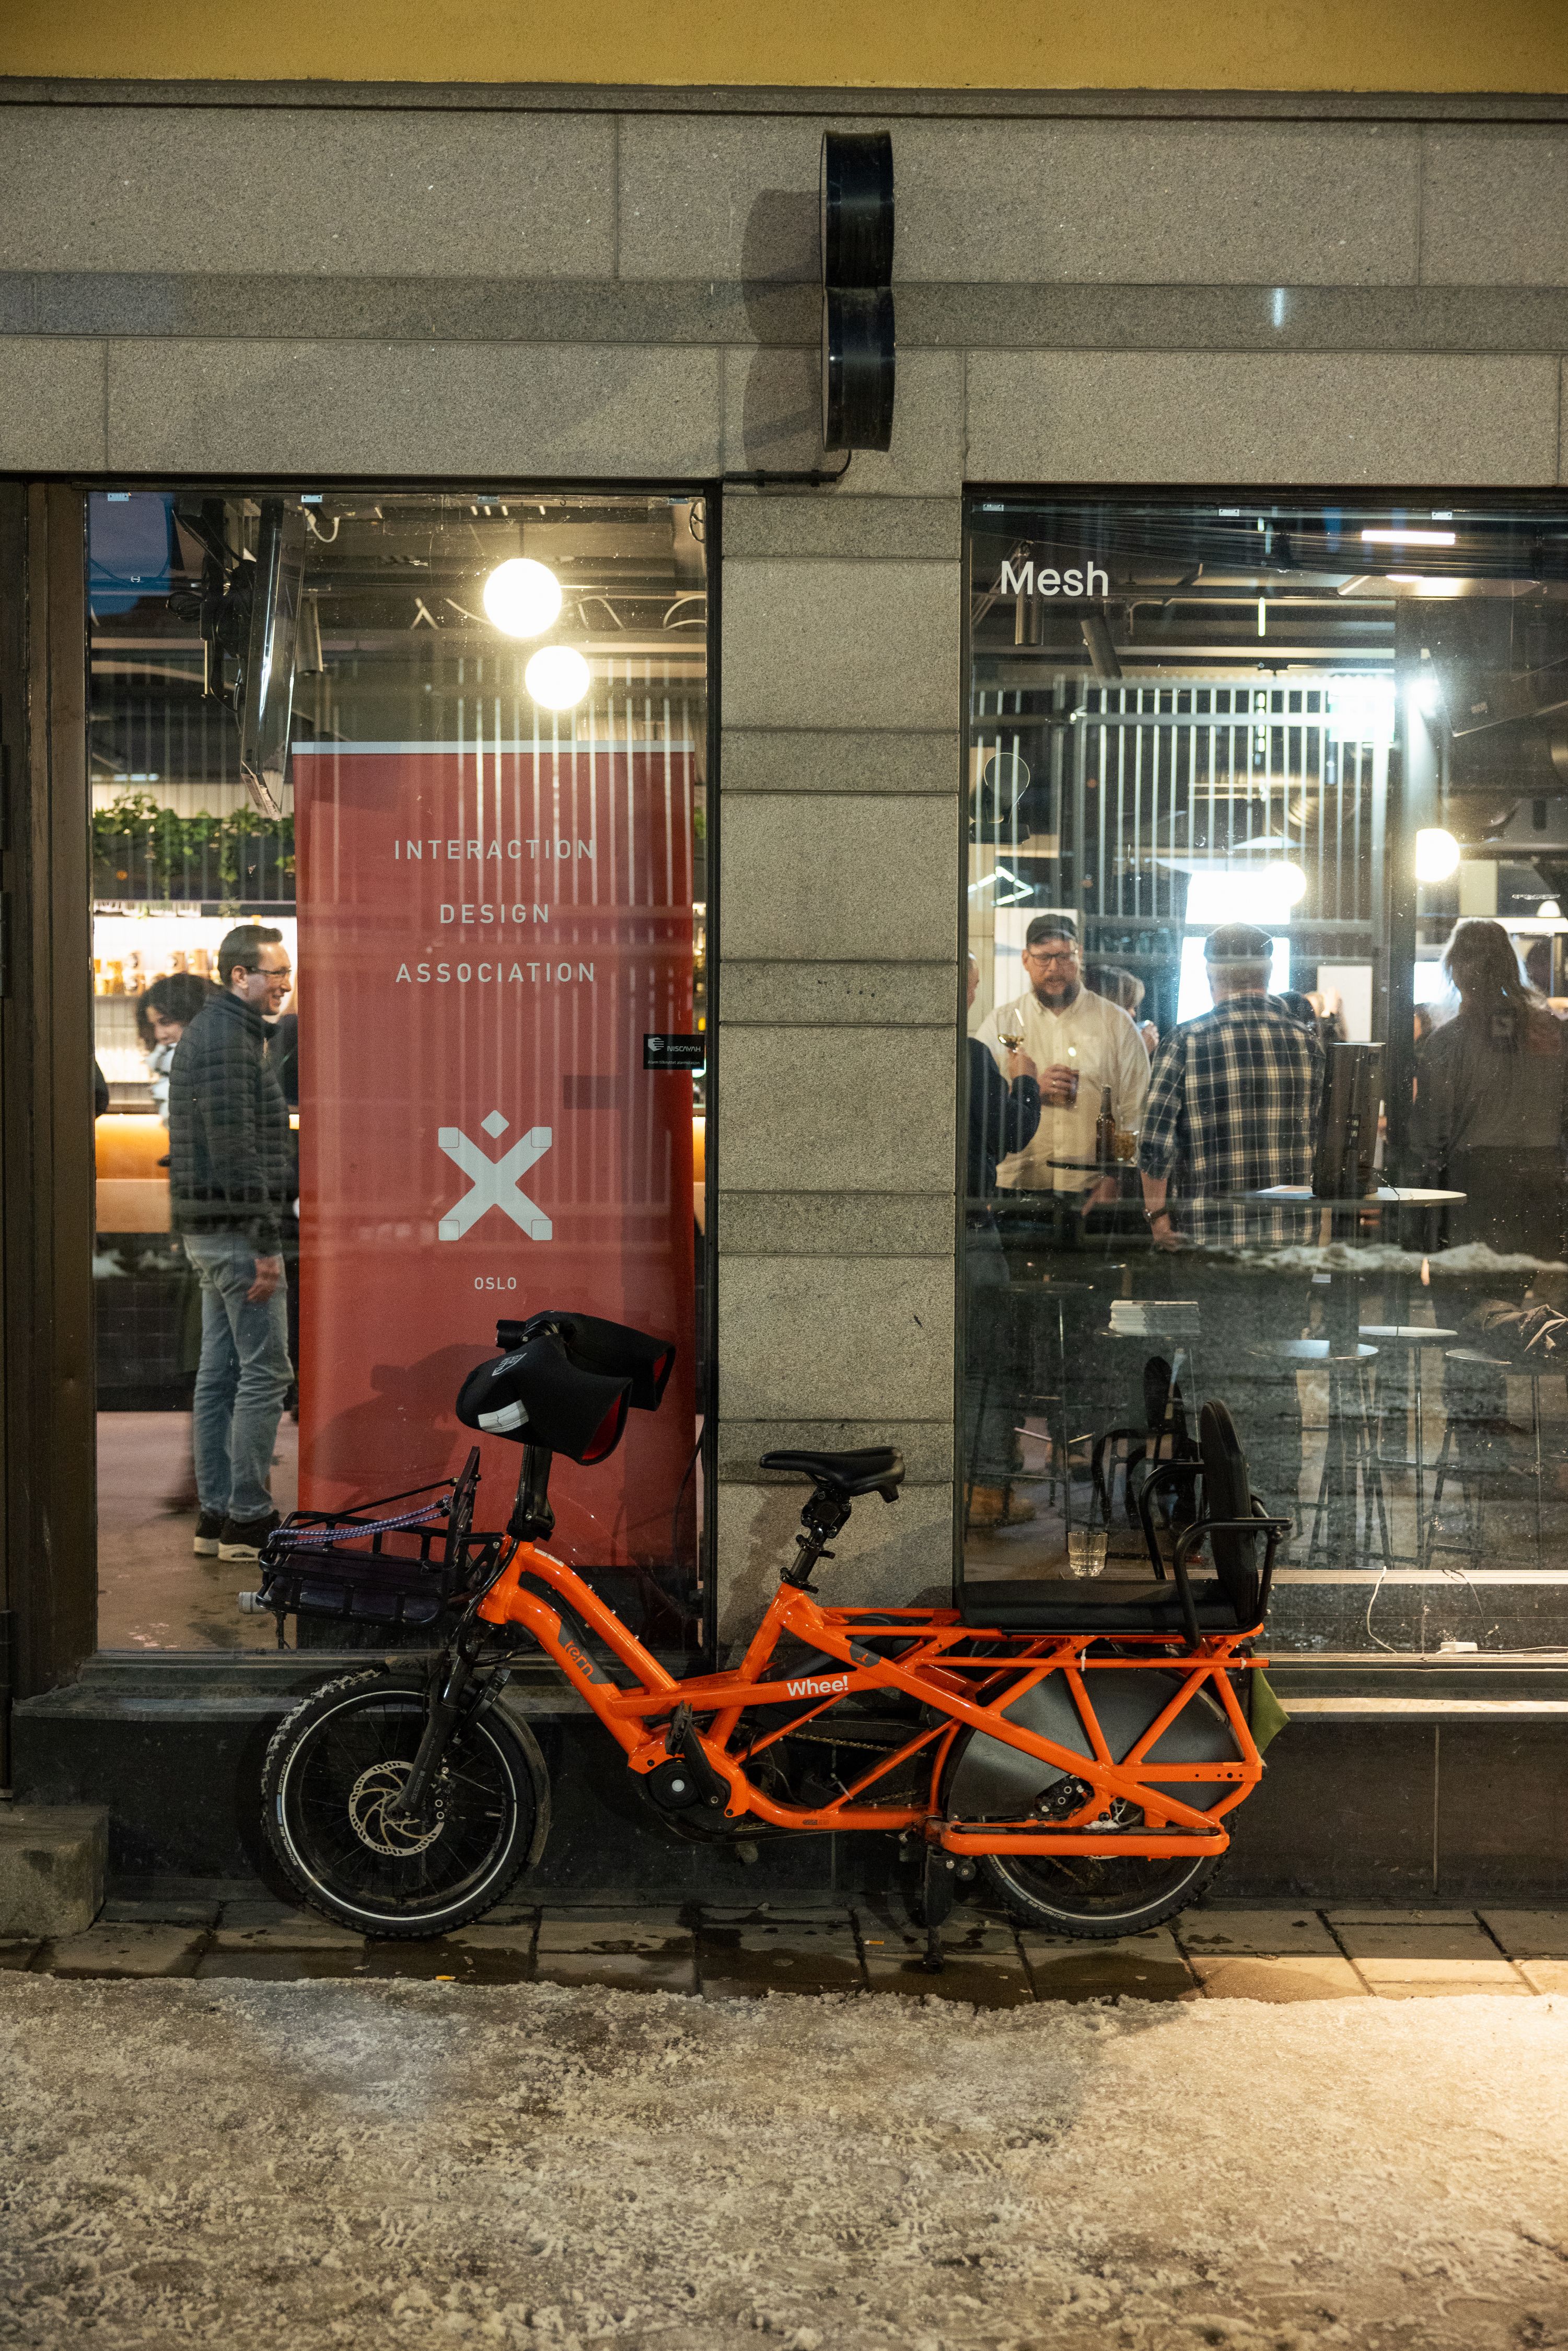 A Tern electric midtail bike stands parked outside MESH Youngstorget. Behind the bike, IxDA Oslo's banner is visible.